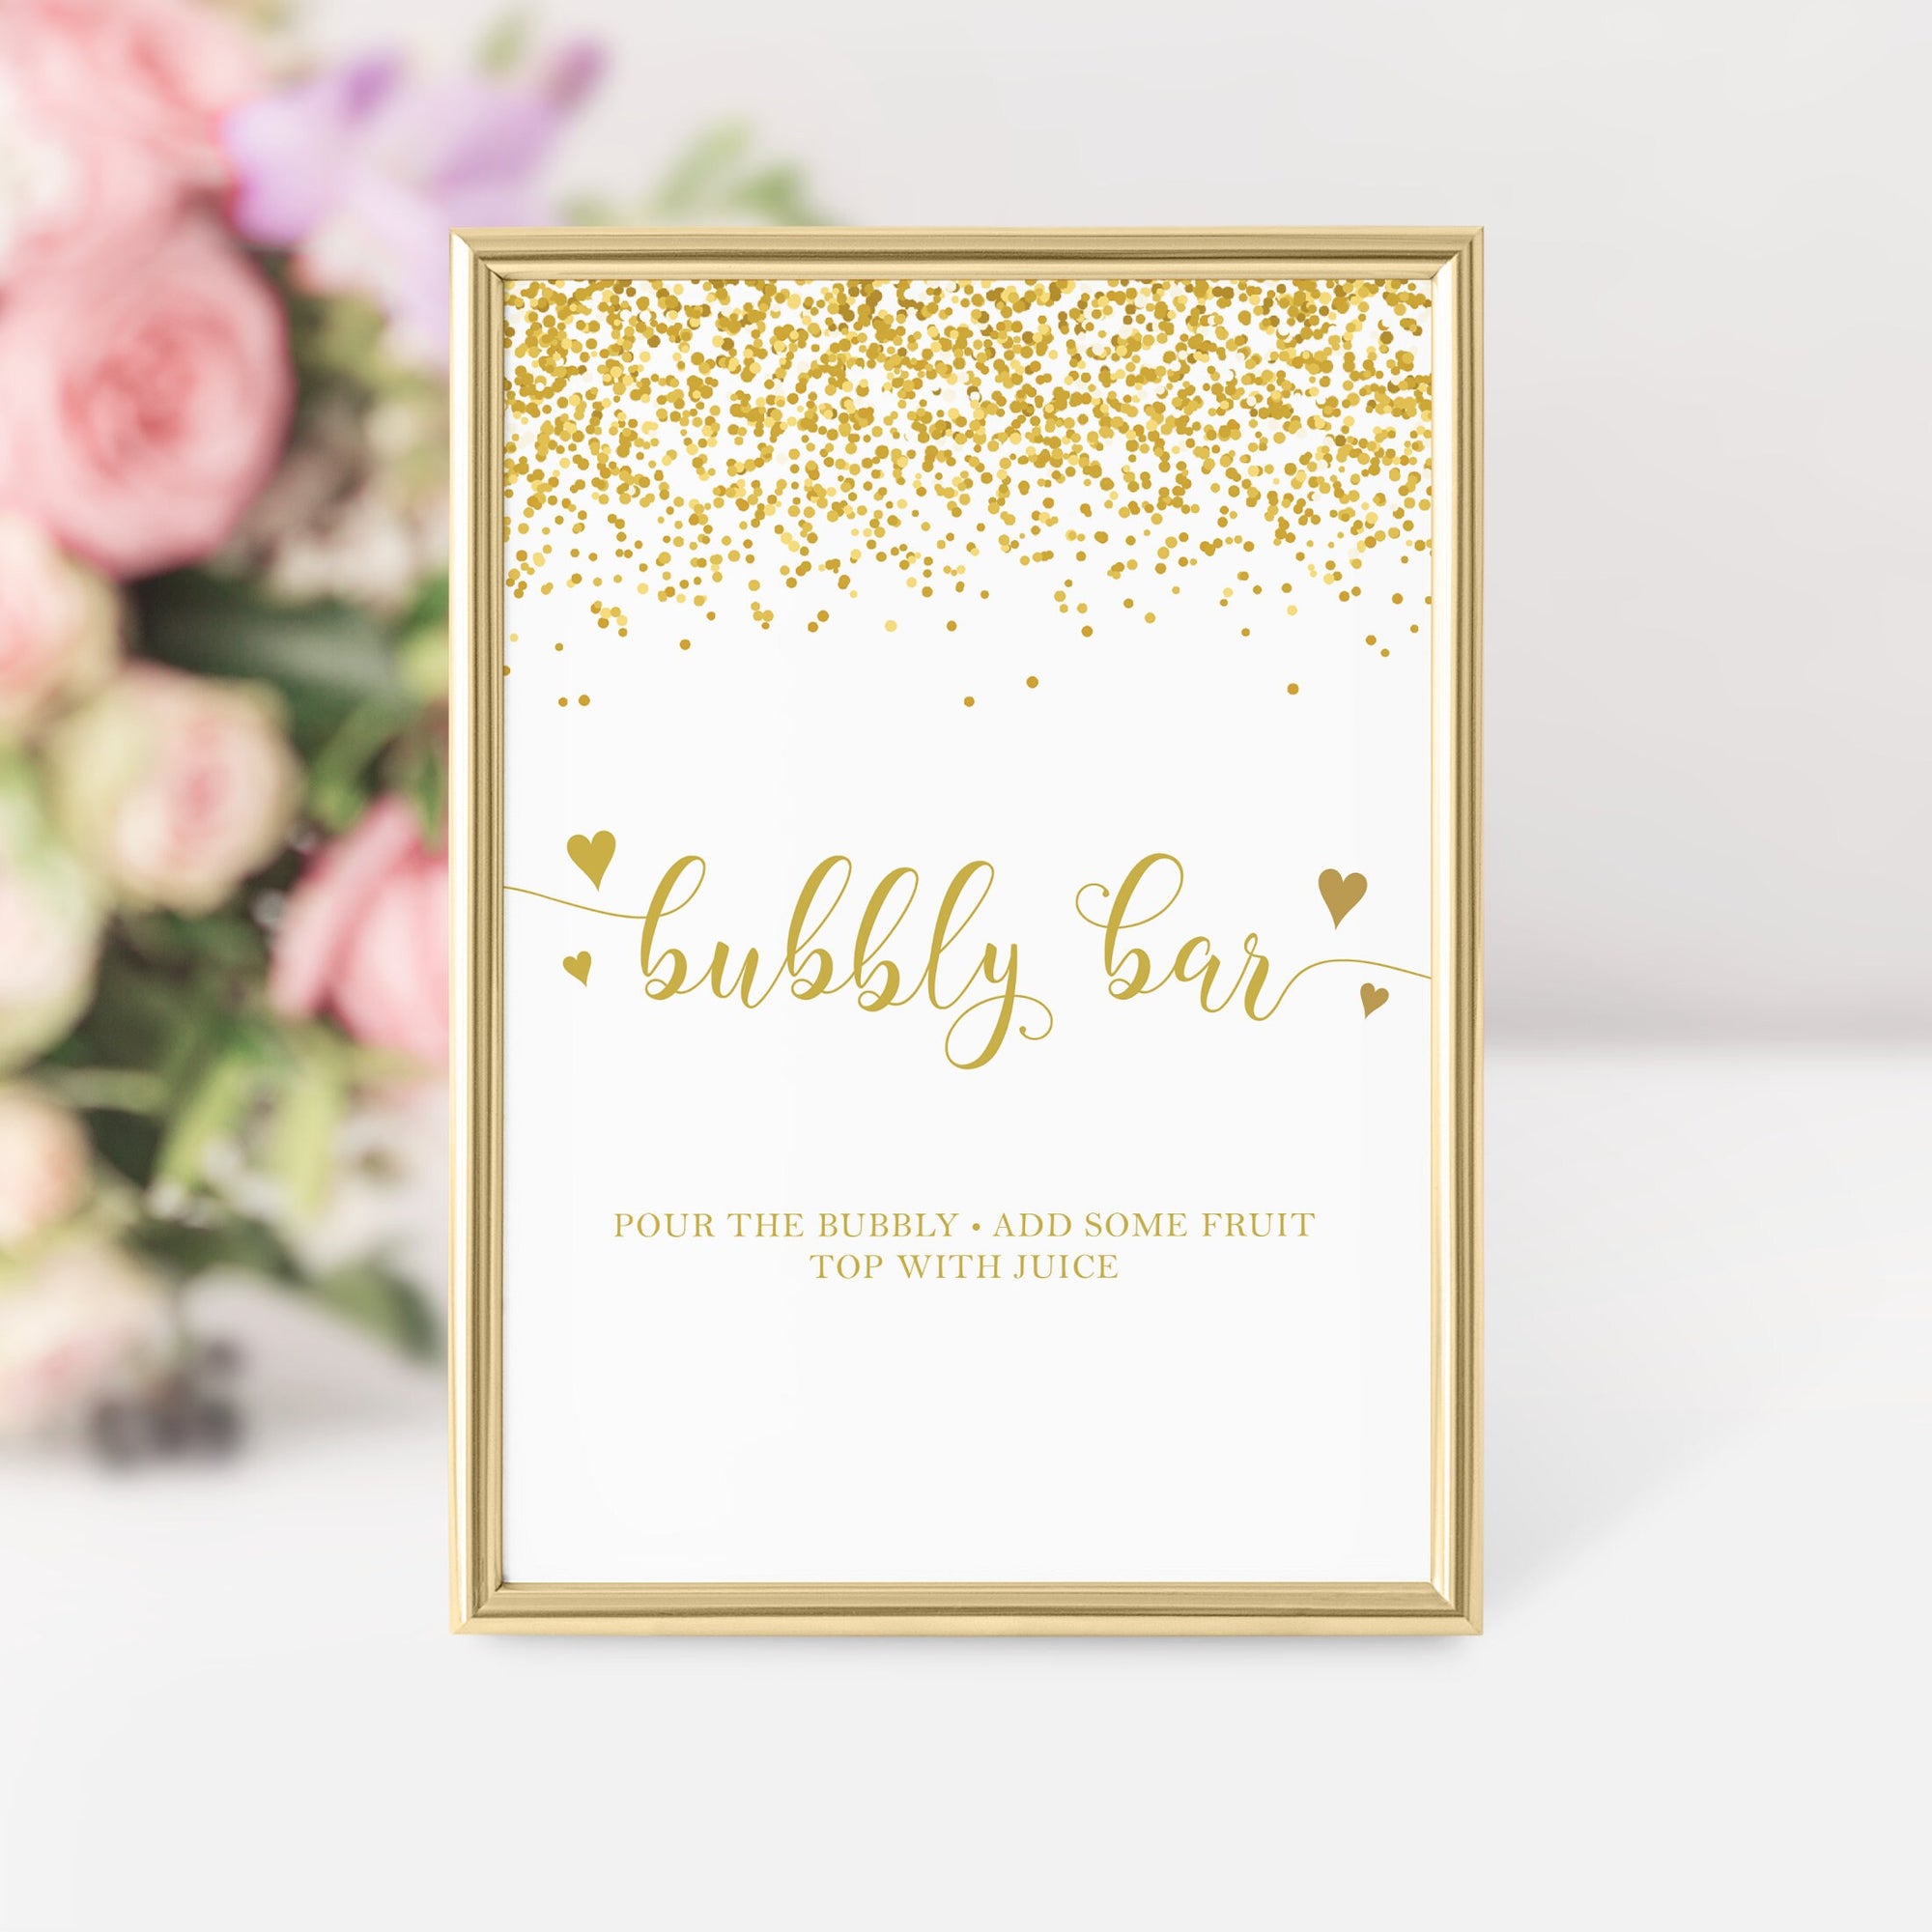 Bubbly Bar Sign Printable, Mimosa Bar Sign, Galentines Party Decorations, Valentines Wedding, Galentines Day, DIGITAL DOWNLOAD V100